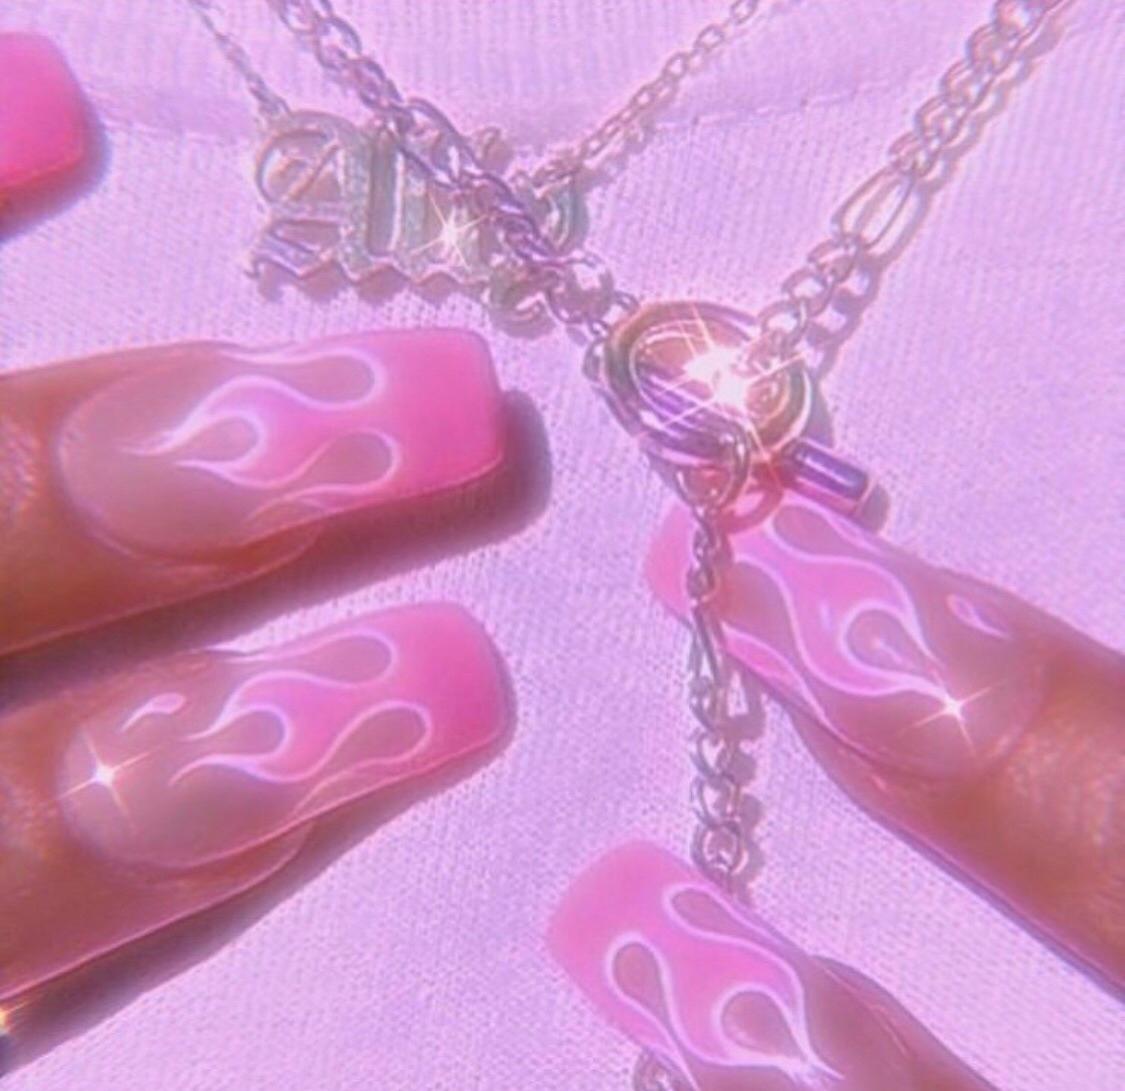 A person with pink nails holding up some jewelry - Baddie, nails